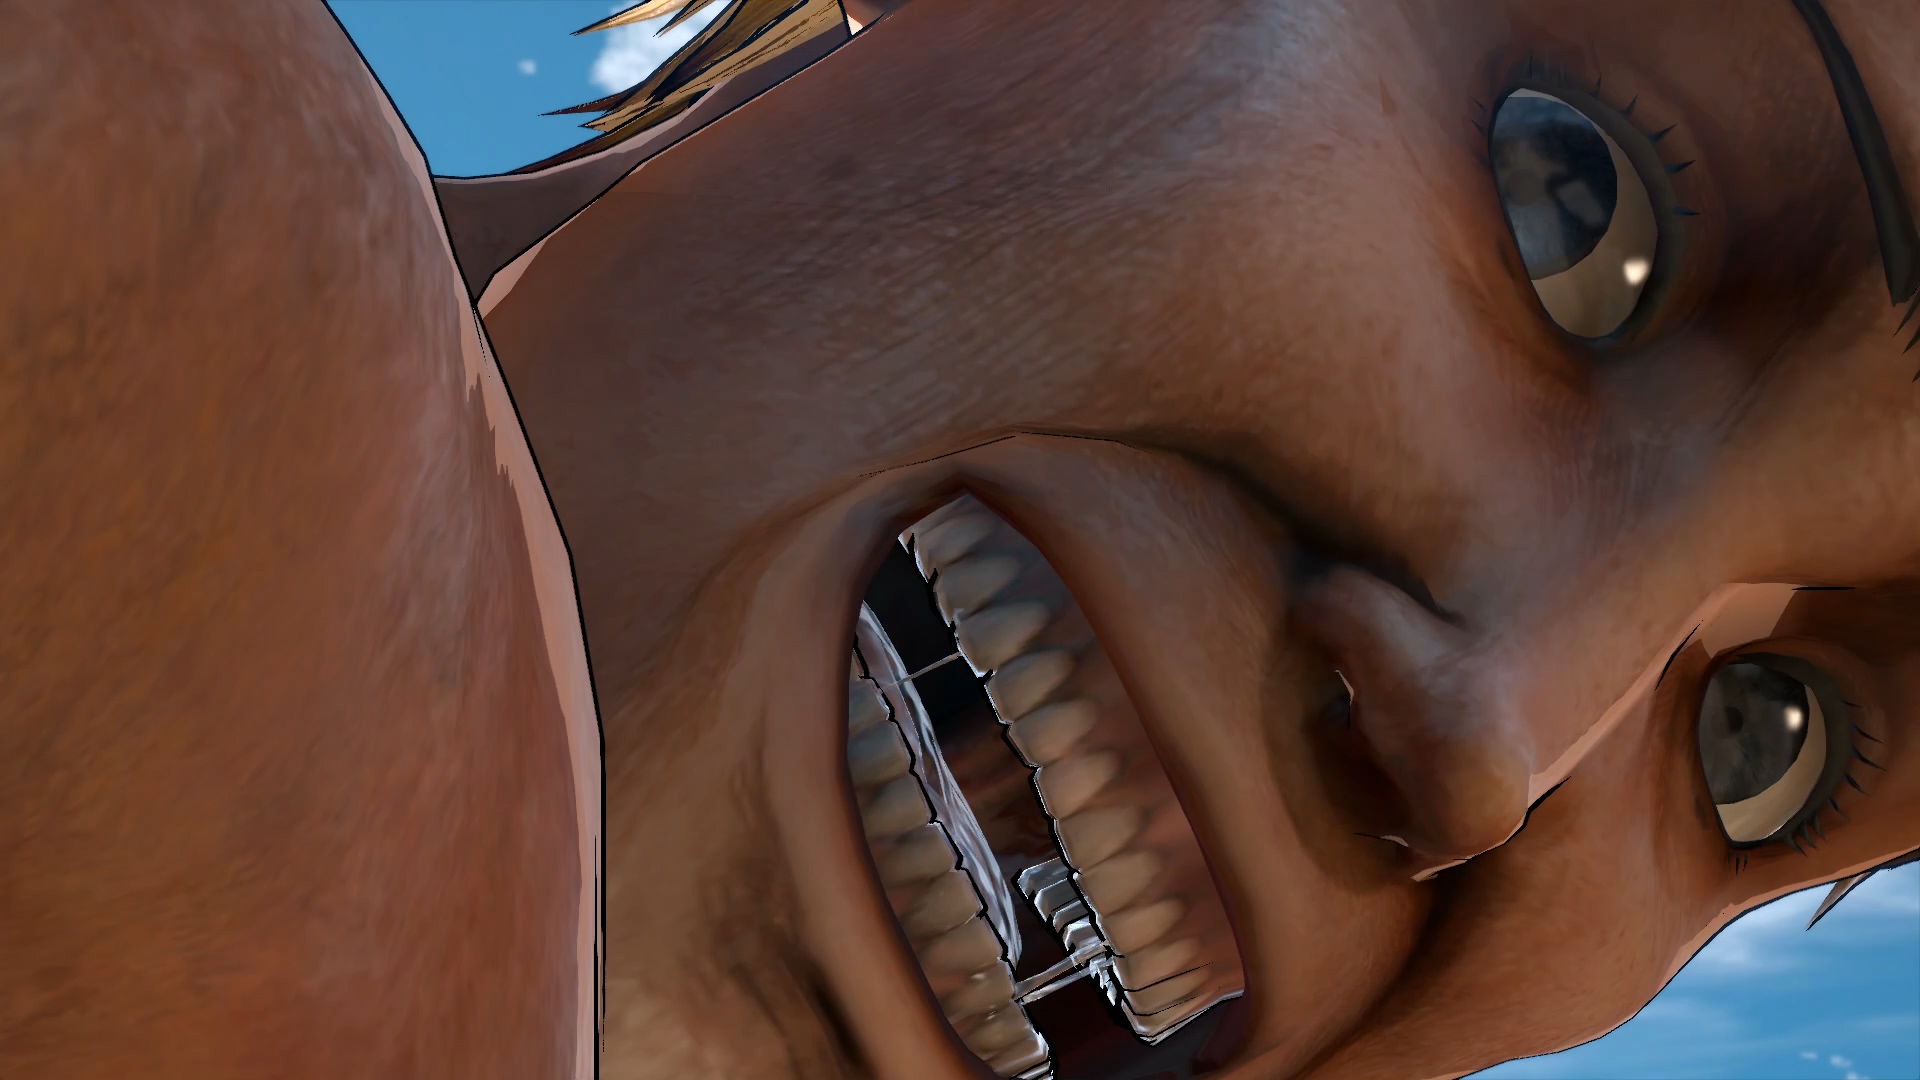 The Attack On Titan Game Has One Job, And It Does It Pretty Well